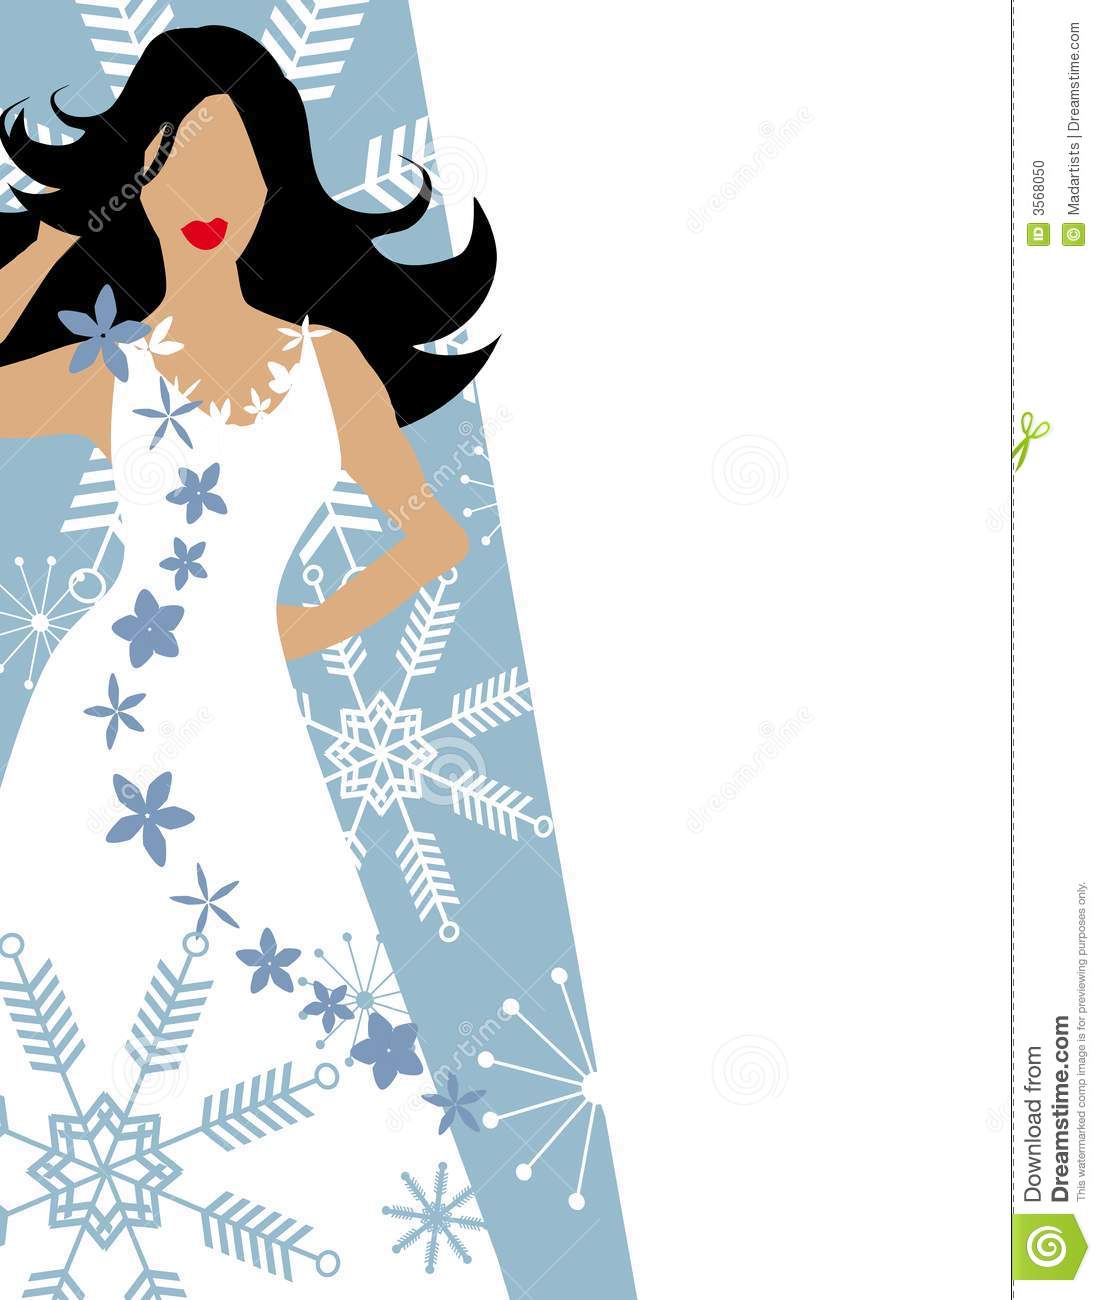 Clip Art Illustration Of A Dark Haired Fashion Model Wearing A White